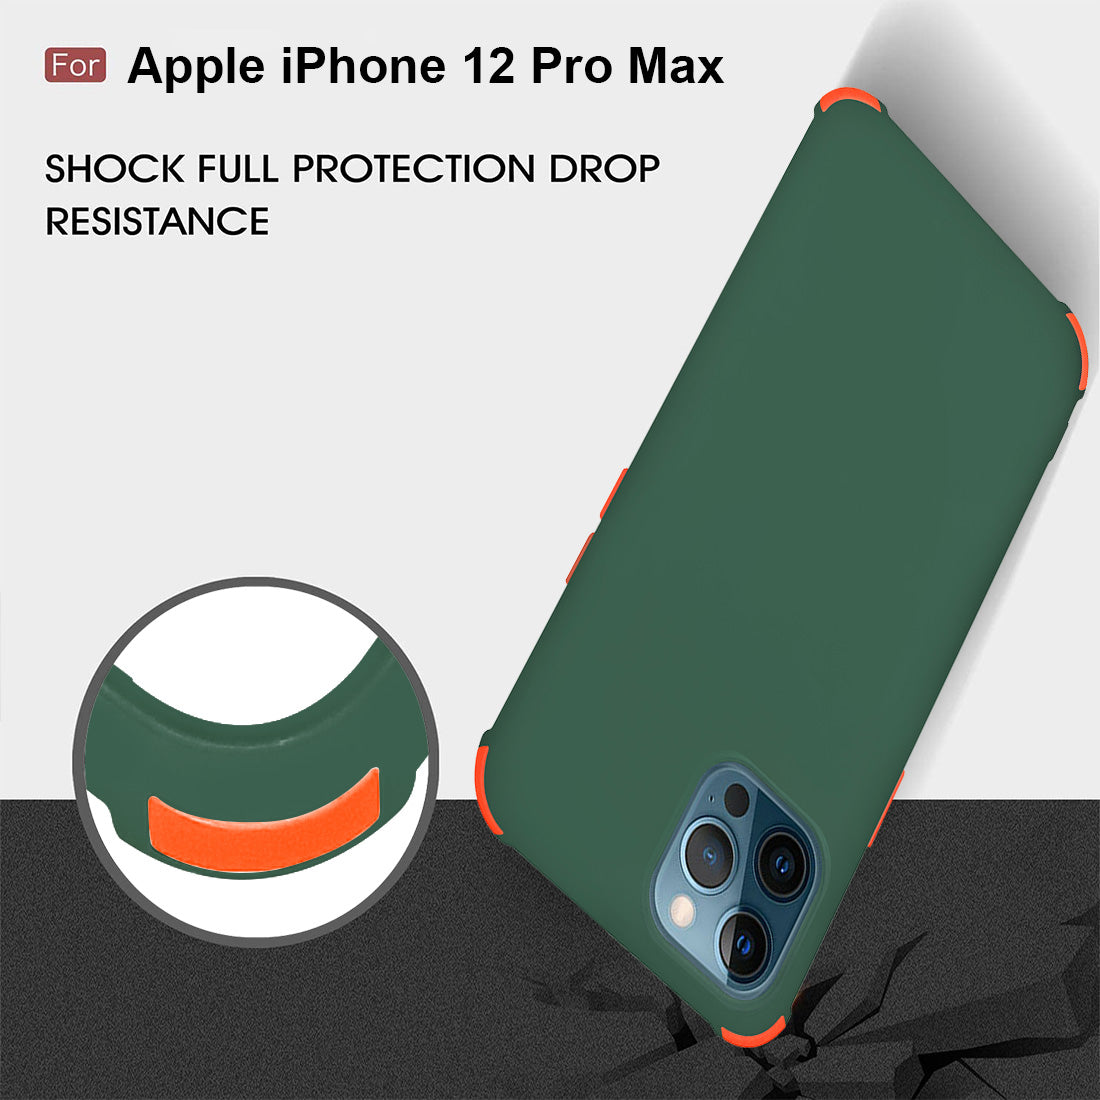 Matte Finish TPU Back Cover for Apple iPhone 12 Pro Max